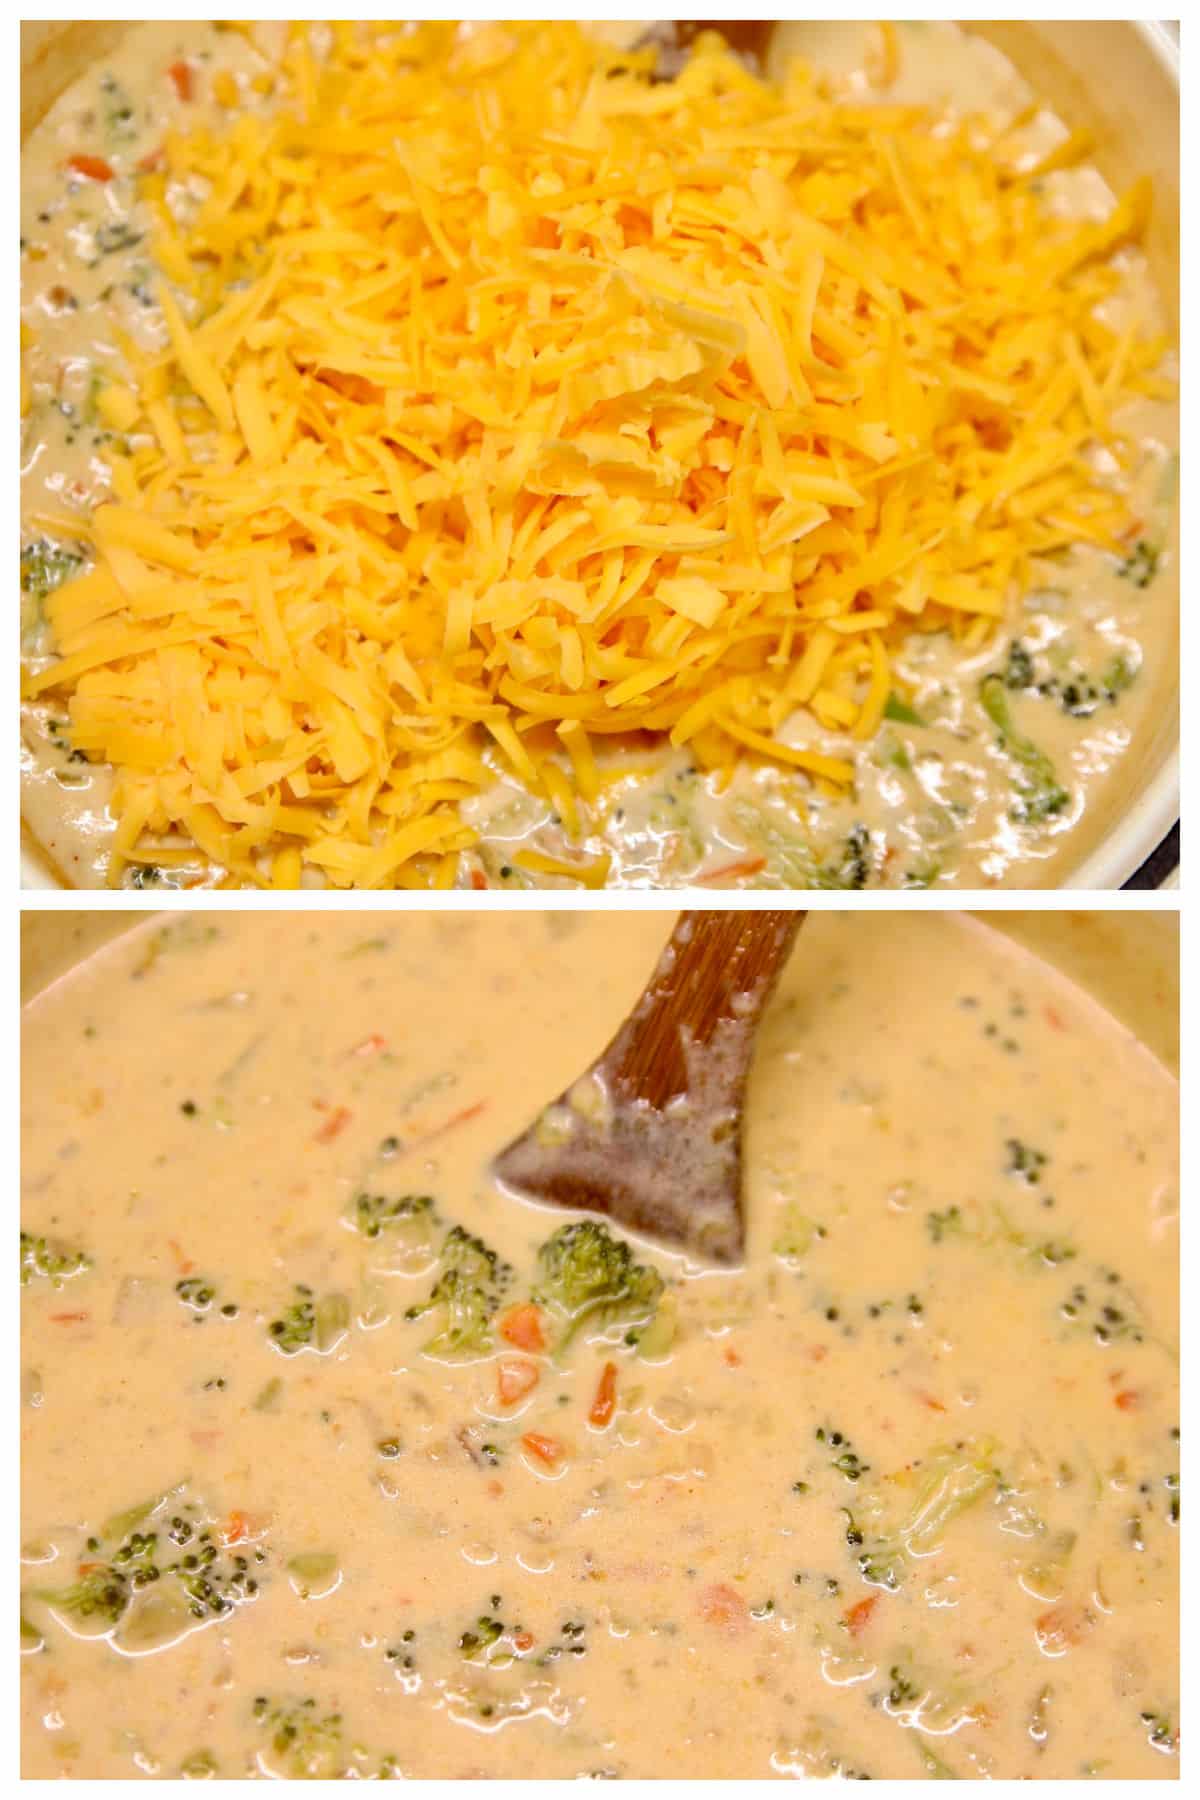 Collage adding shredded cheese to broccoli cheese soup - mixed.